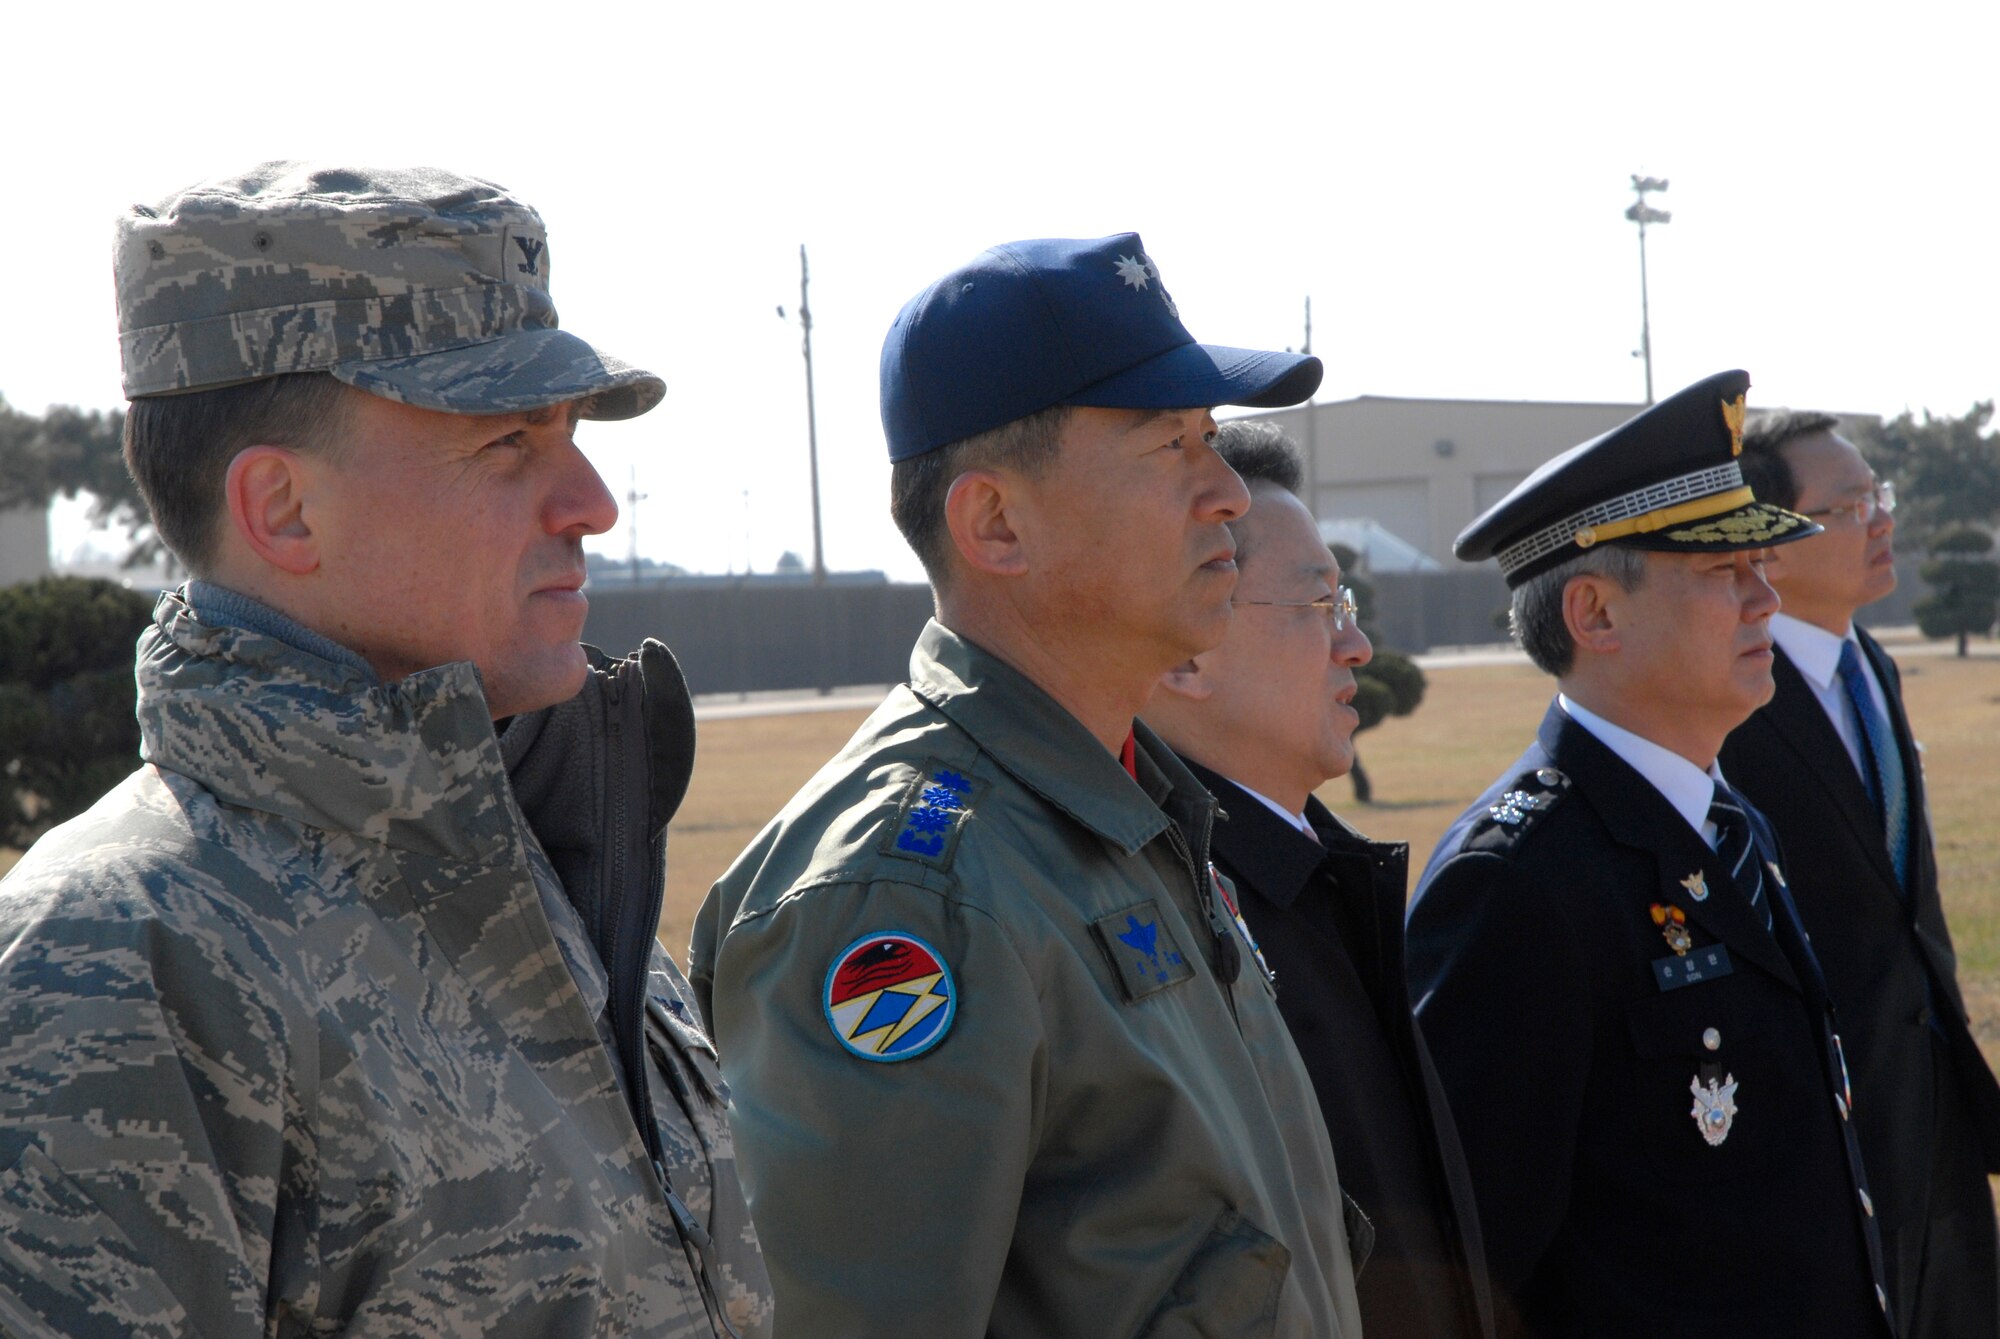 KUNSAN AIR BASE, Republic of Korea -- Col. Robert Givens, commander of the 8th Fighter Wing, Col. Choi, Jae Hun, commander of the 38th Fighter Group, Mr. Wan-ju Kim, Governor of Jeonbuk Province and Mr. Son, Chang Wan, chief of Jeonbuk Provincial Police Agency, await the arrival of  Mr. Un-chan Chung, Prime Minister of South Korea, during his visit here March 18. The prime minister toured the Gunsan area with the mayor and governor. (U.S. Air Force photo/Staff Sgt. Darnell T. Cannady)